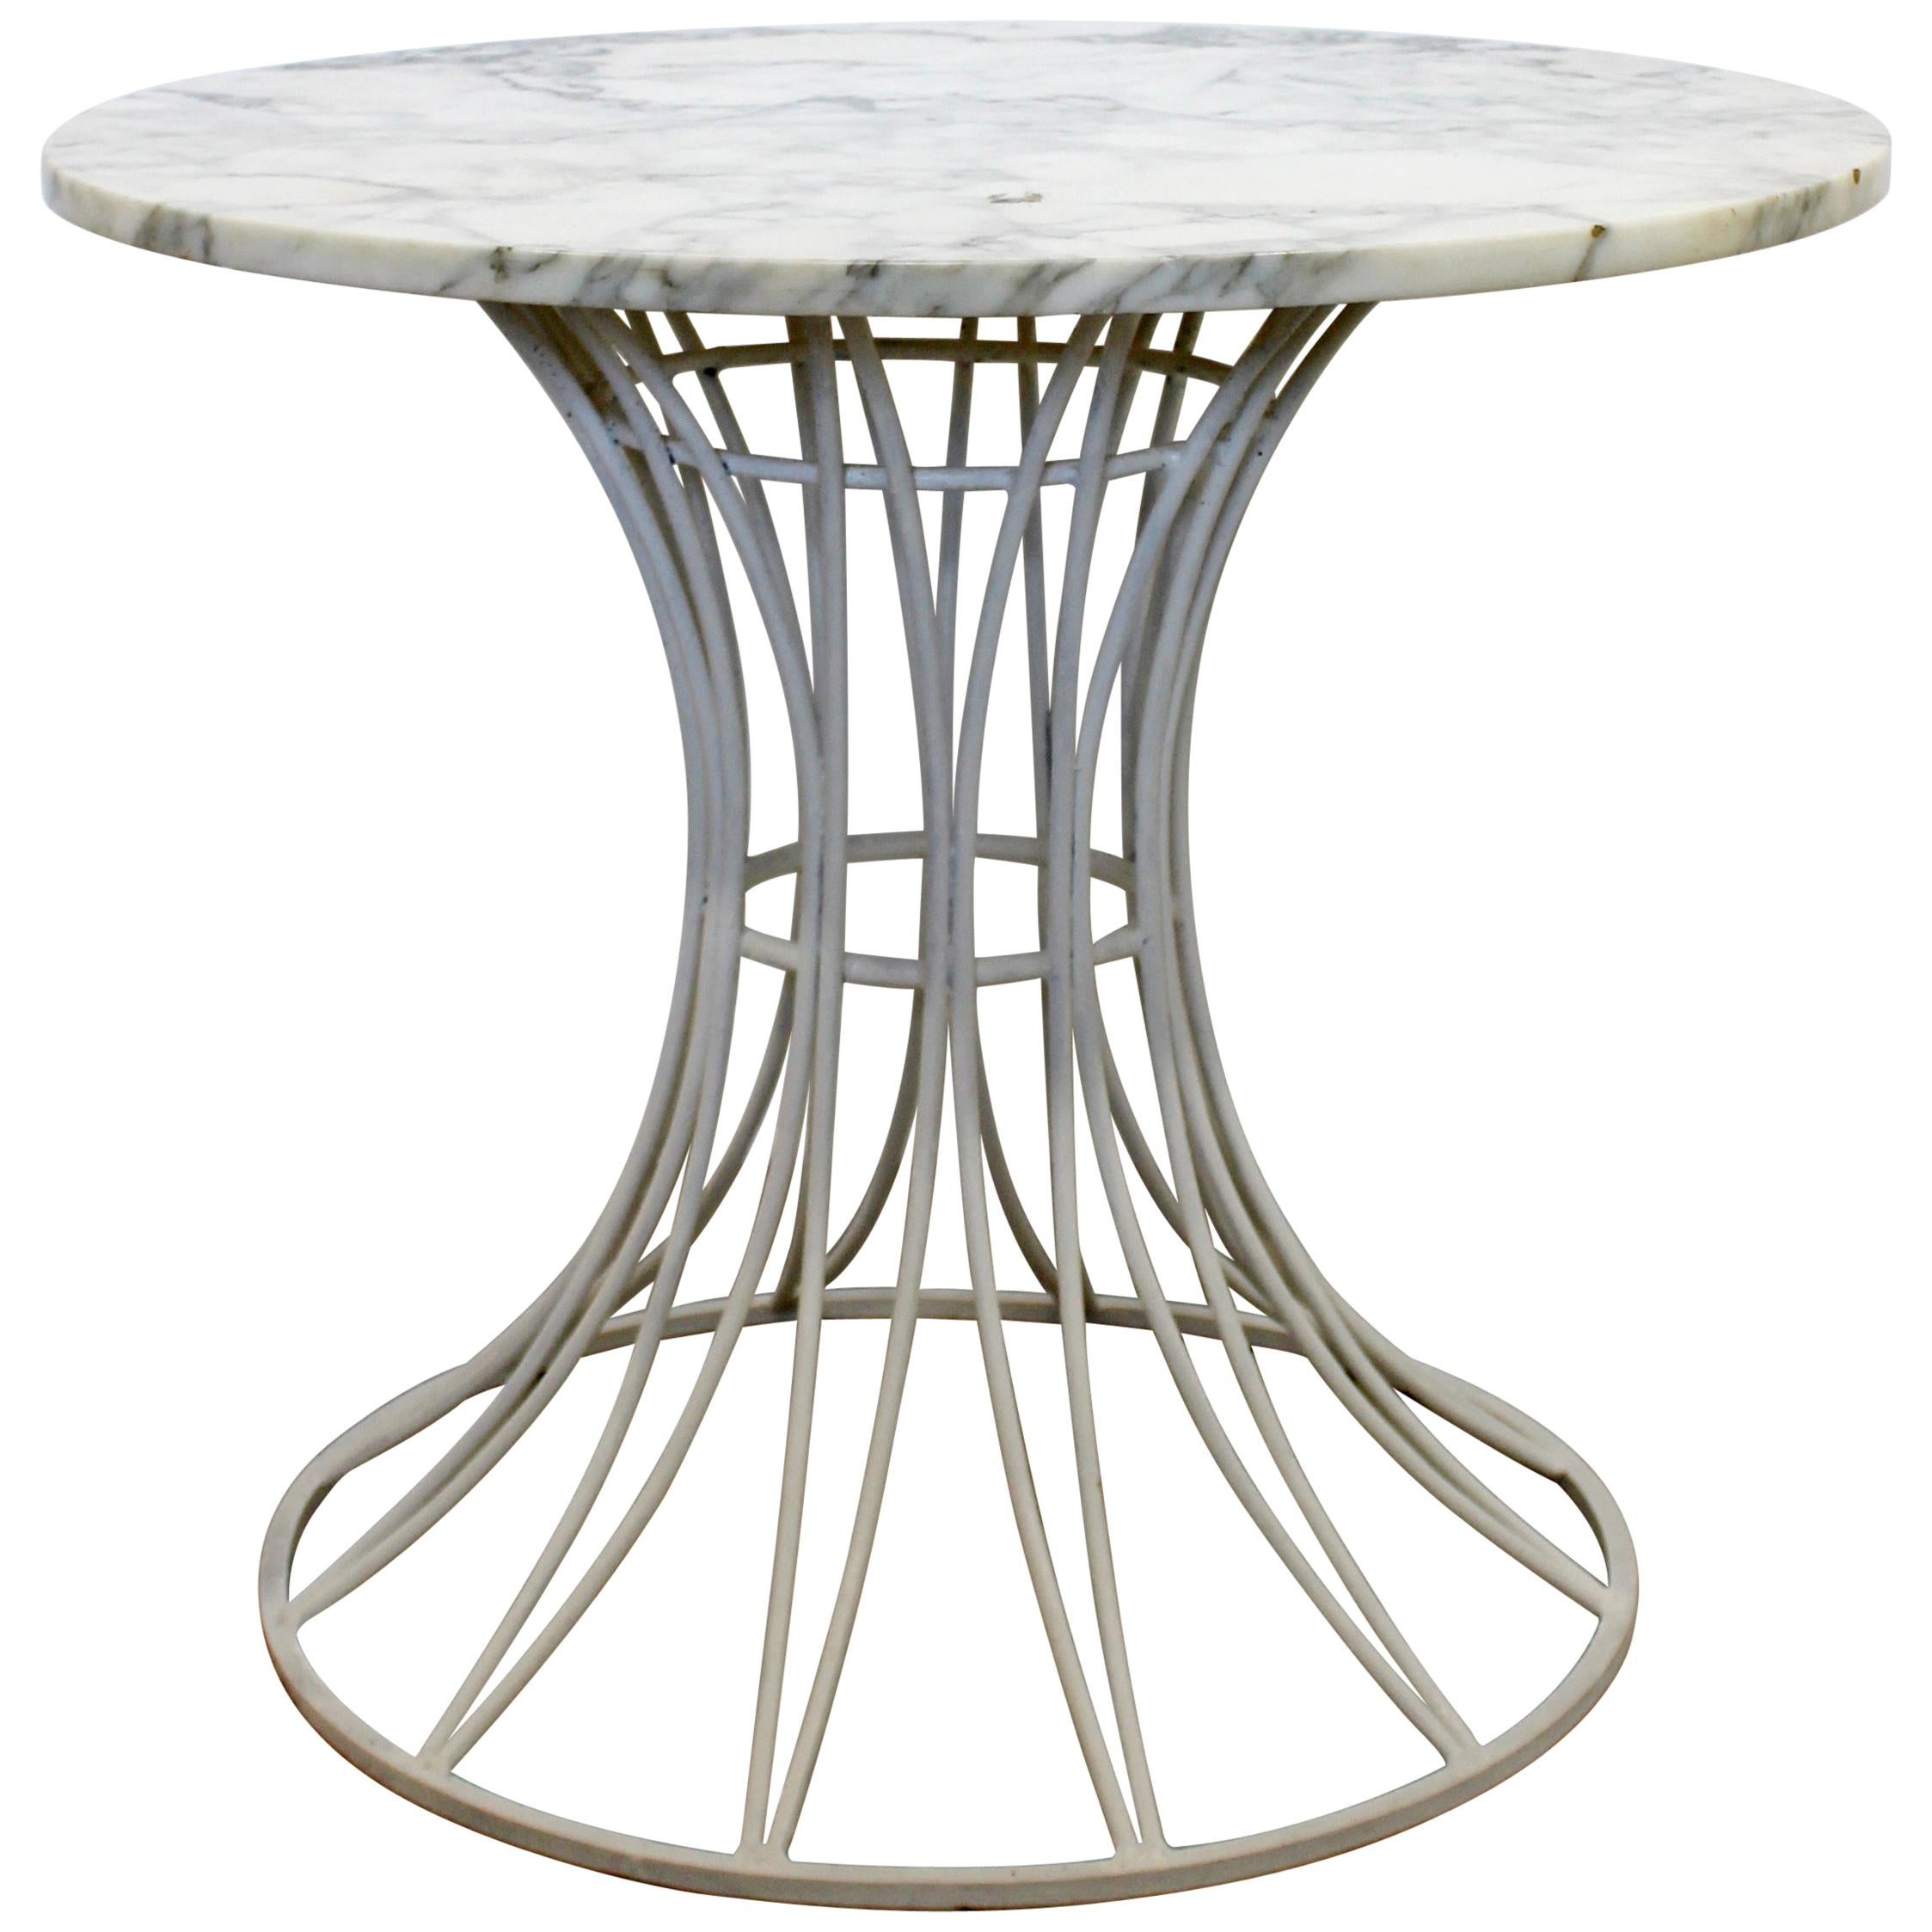 Mid-Century Modern Woodard White Patio Table with Marble Top Round, 1960s